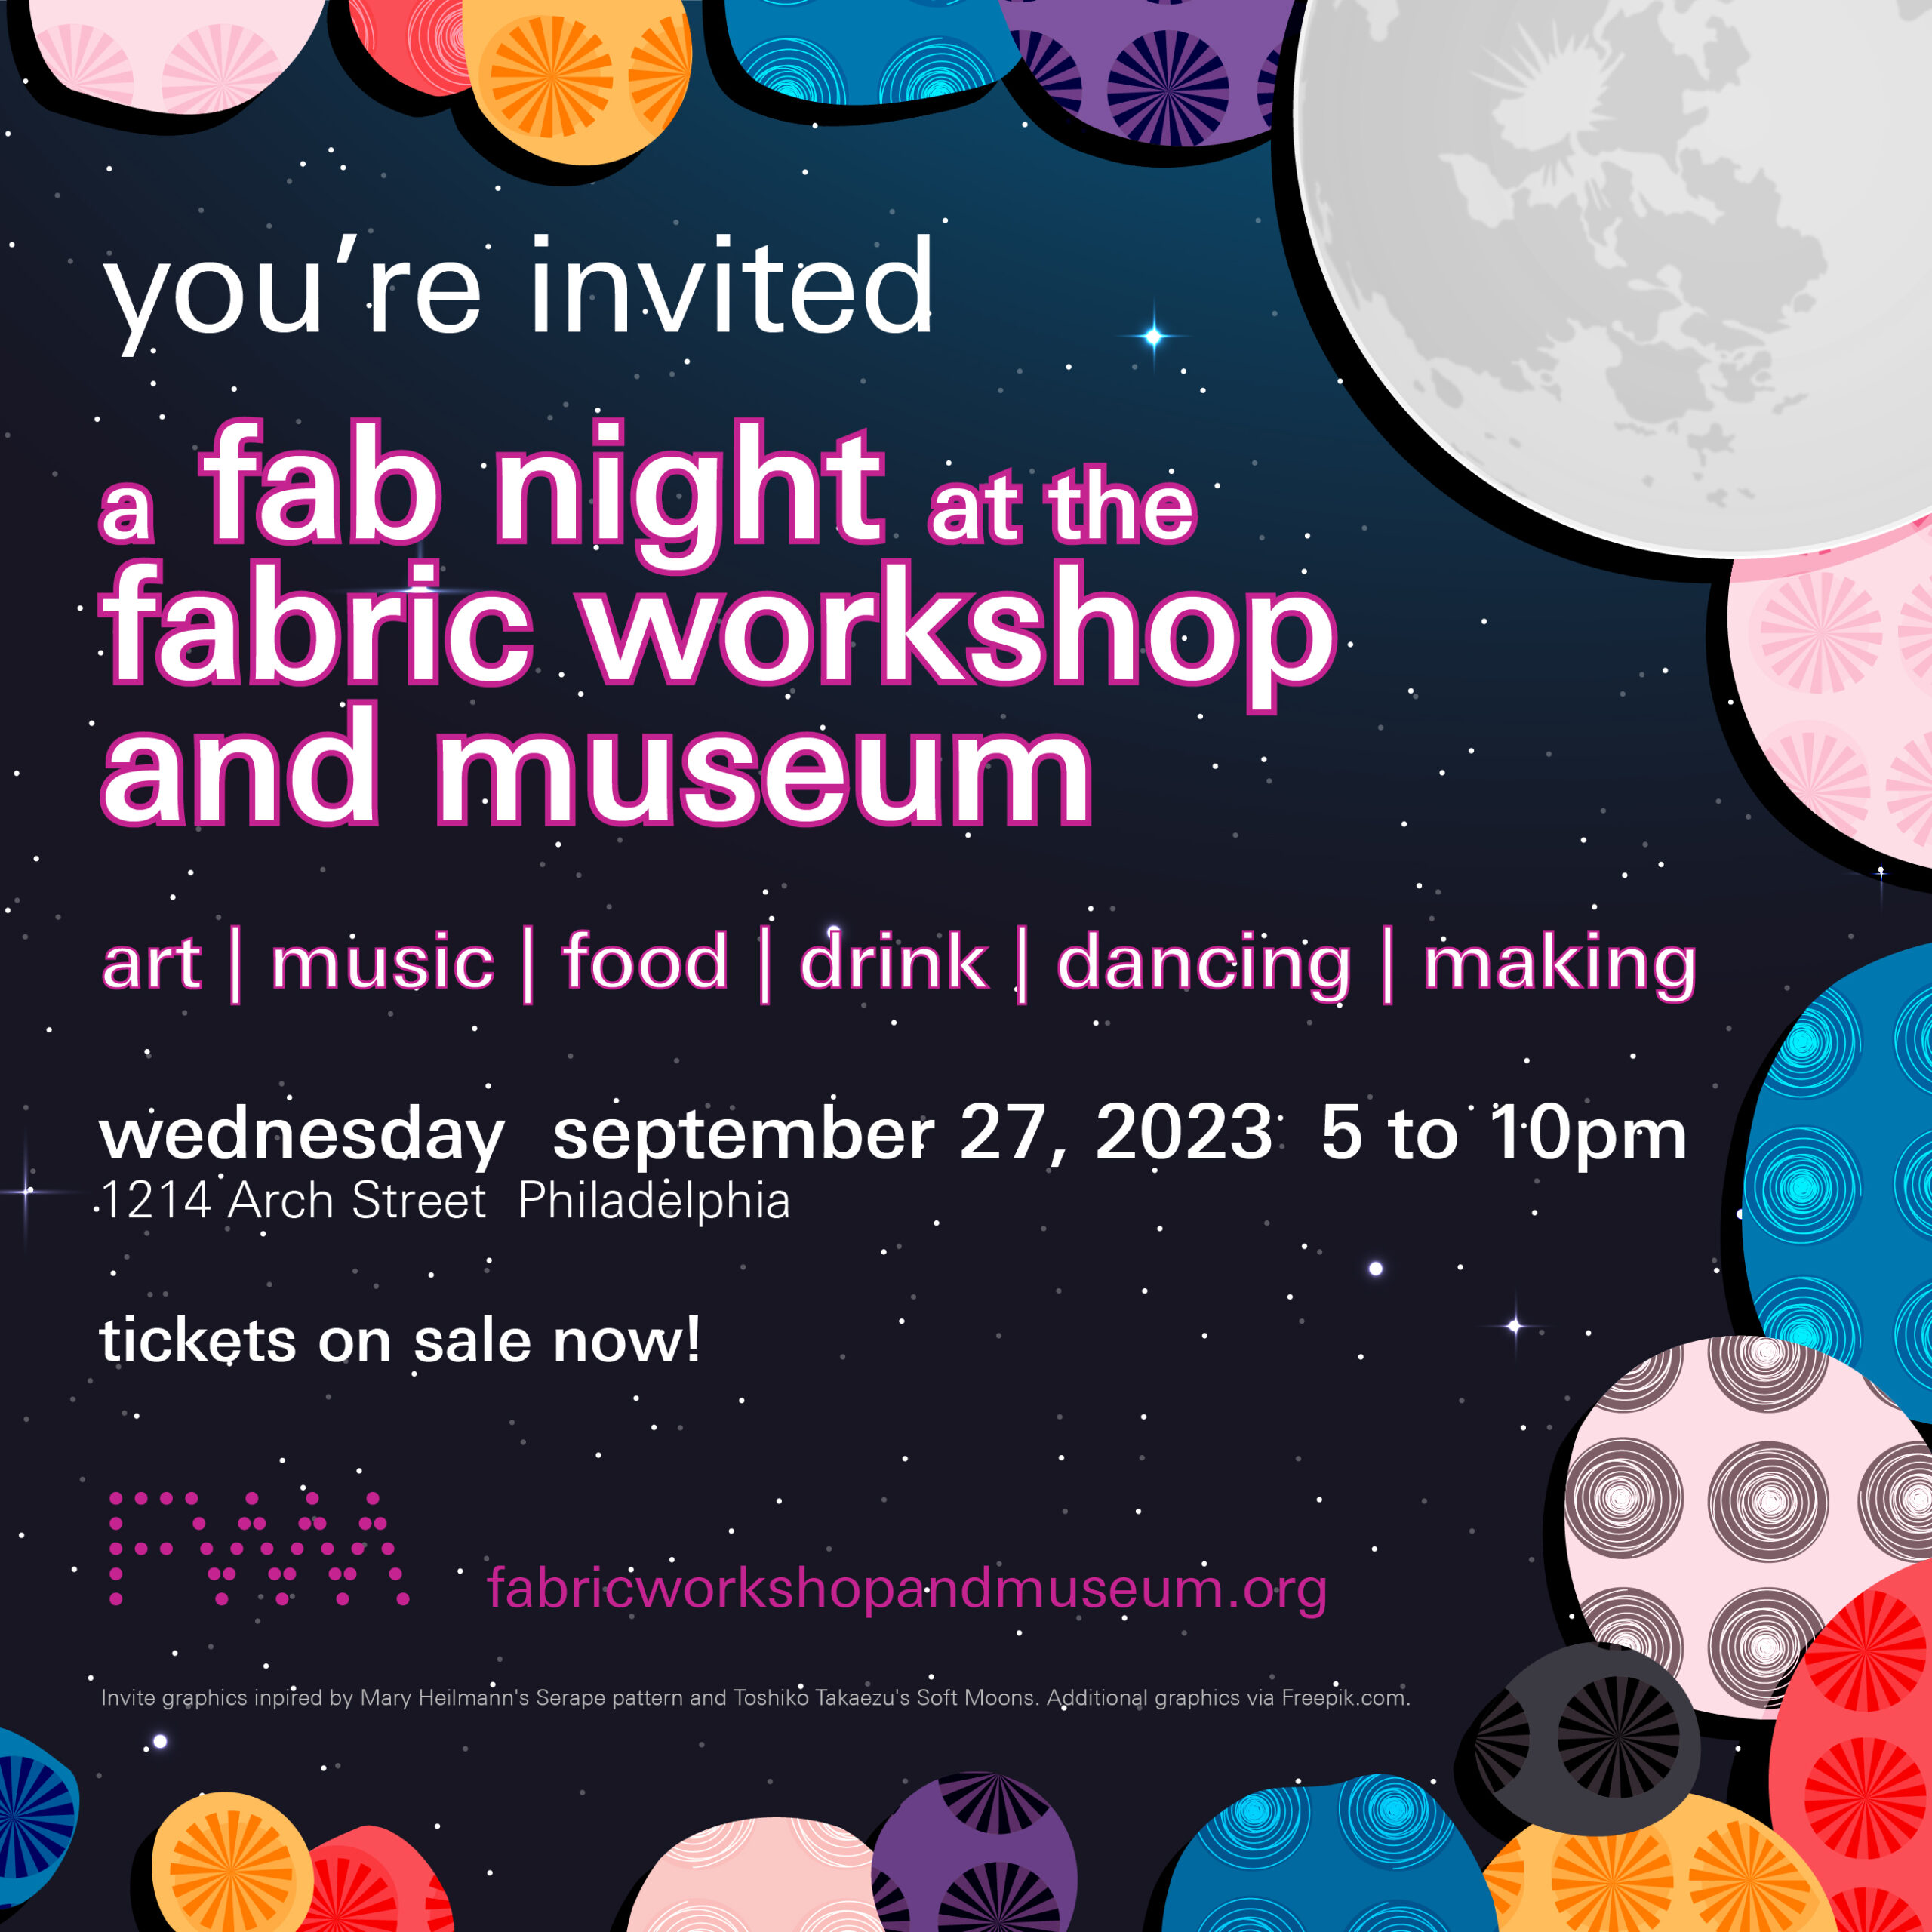 You're Invited: A fab night at the The Fabric Workshop and Museum. Wednesday, September 27, 2023, 5 to 10 pm.